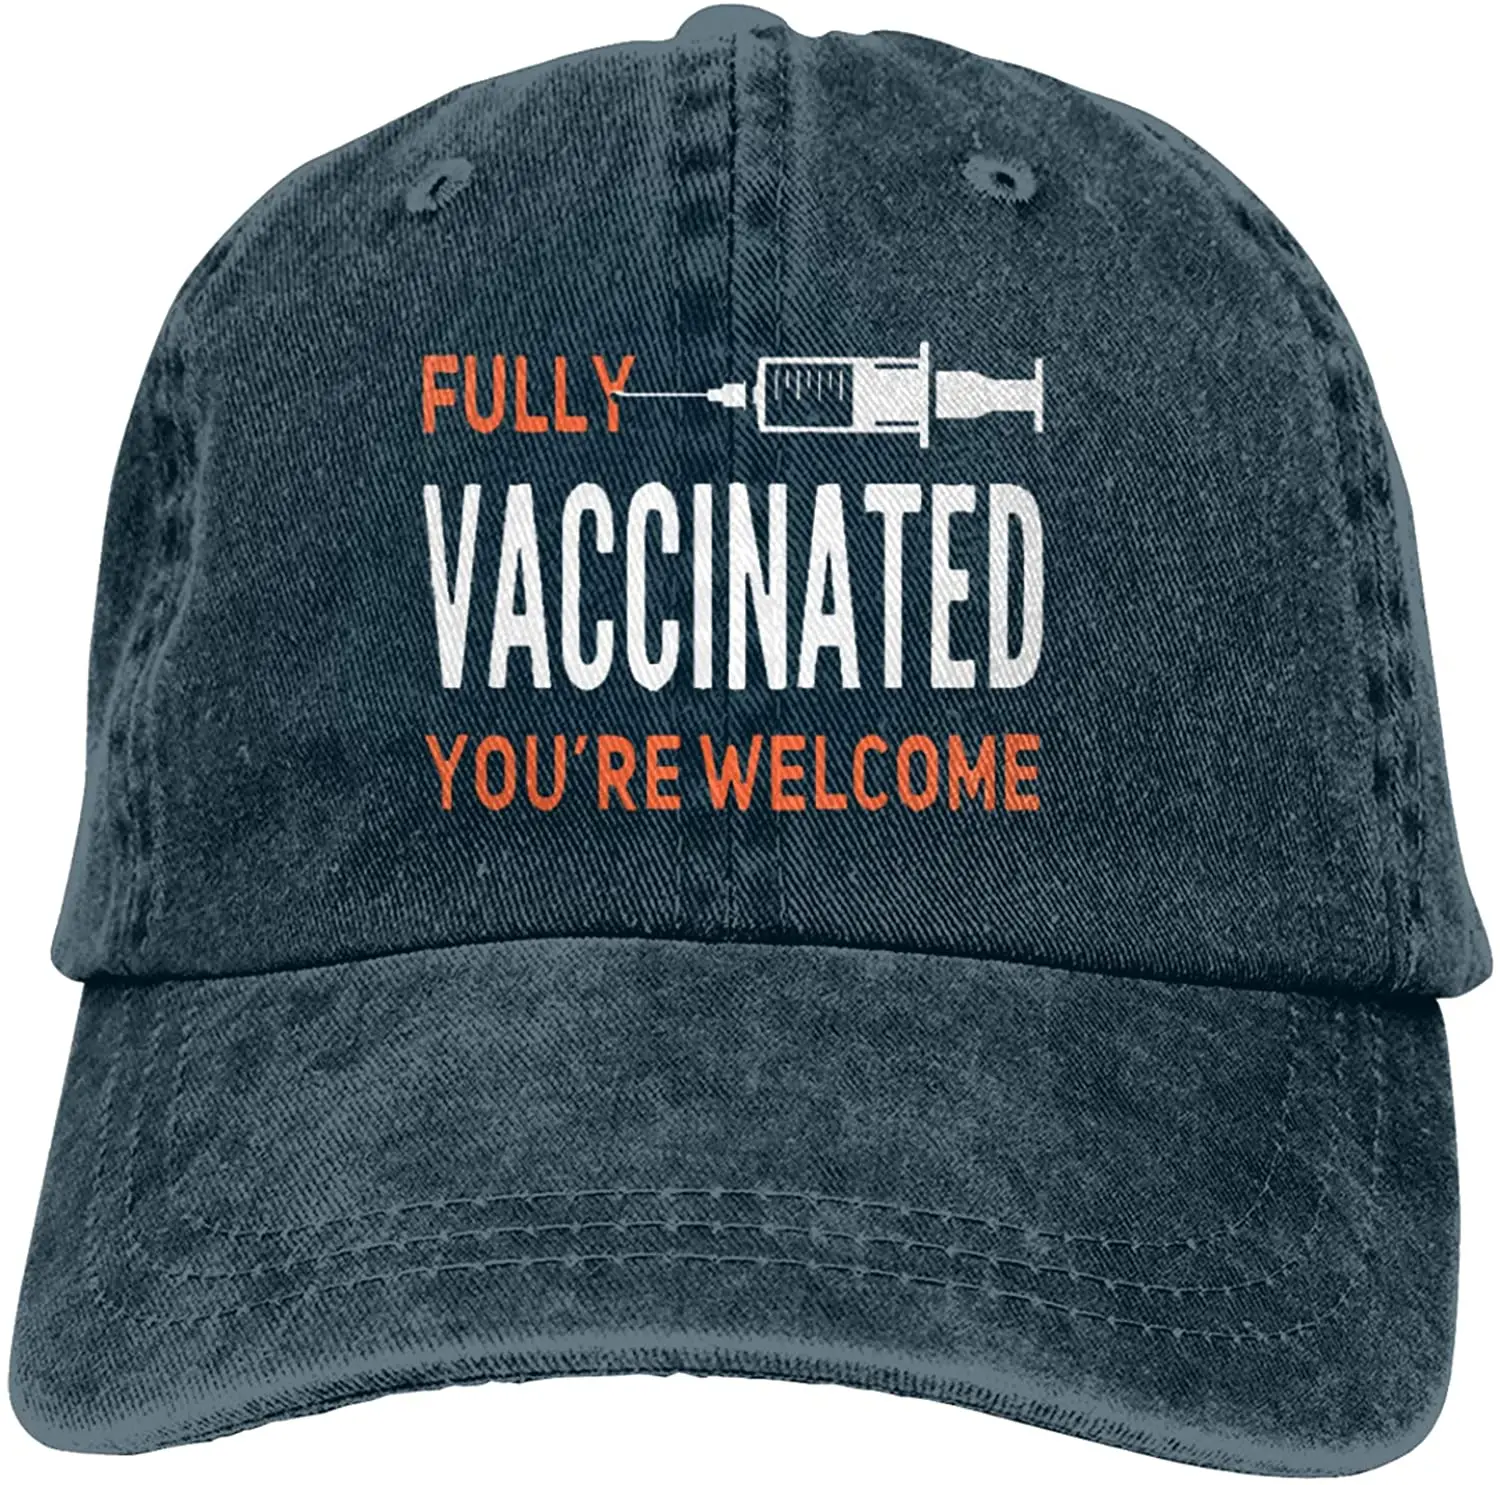 

Fully Vaccinated You're Welcome Hat I Got The Vaccinated Baseball Hat Denim Cap Adjustable Dad Hat